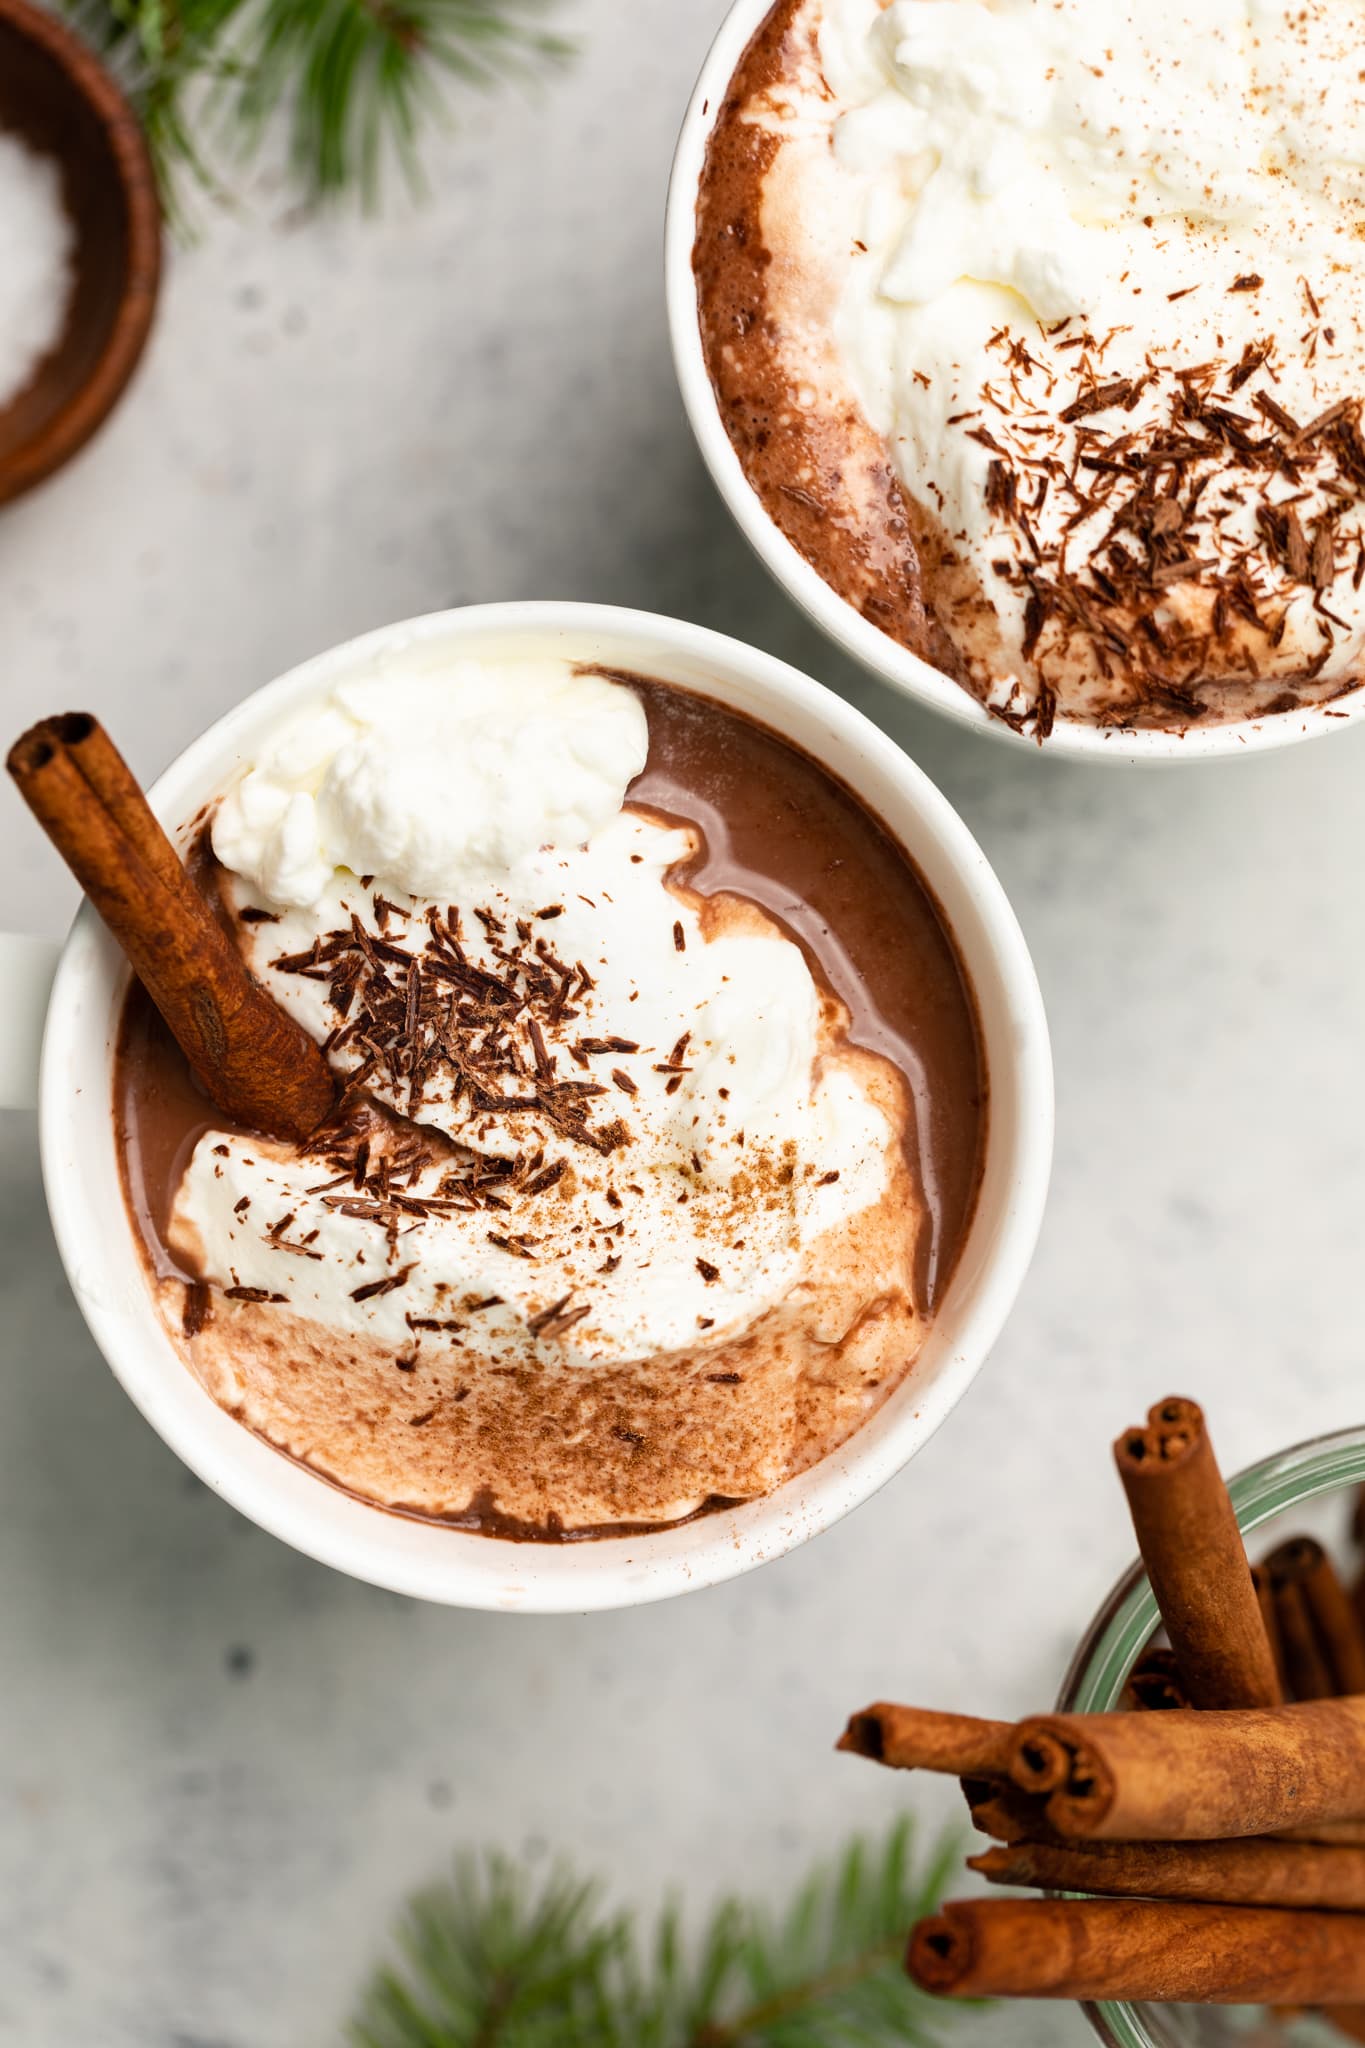 Easy Hot Chocolate Recipe (with lactose-free option!) - Rachel Cooks®